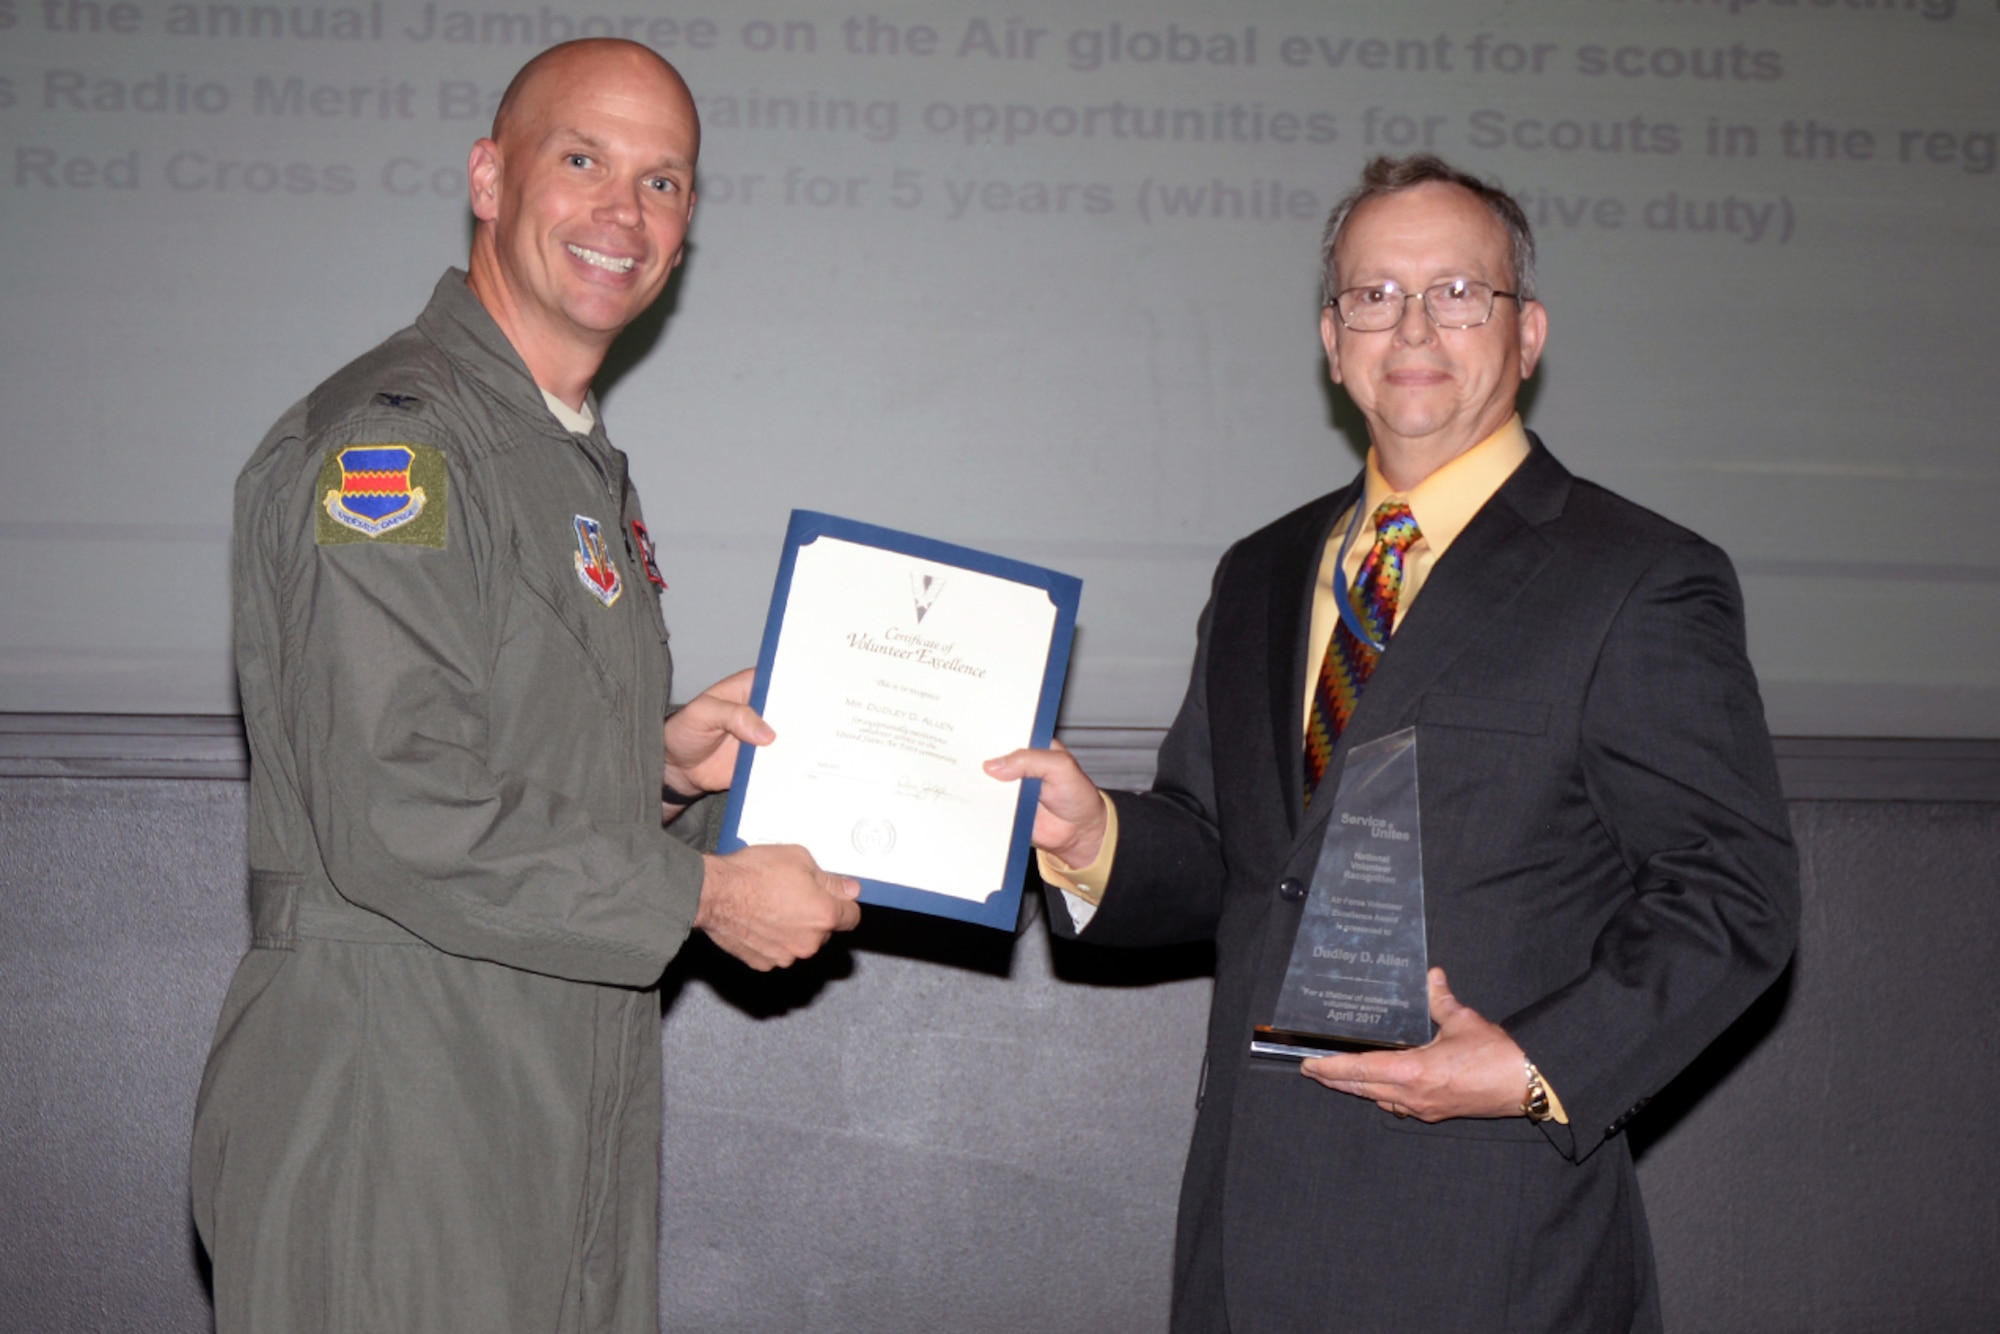 Col. Michael Manion, 55th Wing commander, presents Dudley Allen, 55th Force Support Squadron management analyst, with the 2016 Air Force Volunteer Excellence Award during the 55th Wing staff meeting June 12 at the base conference center.